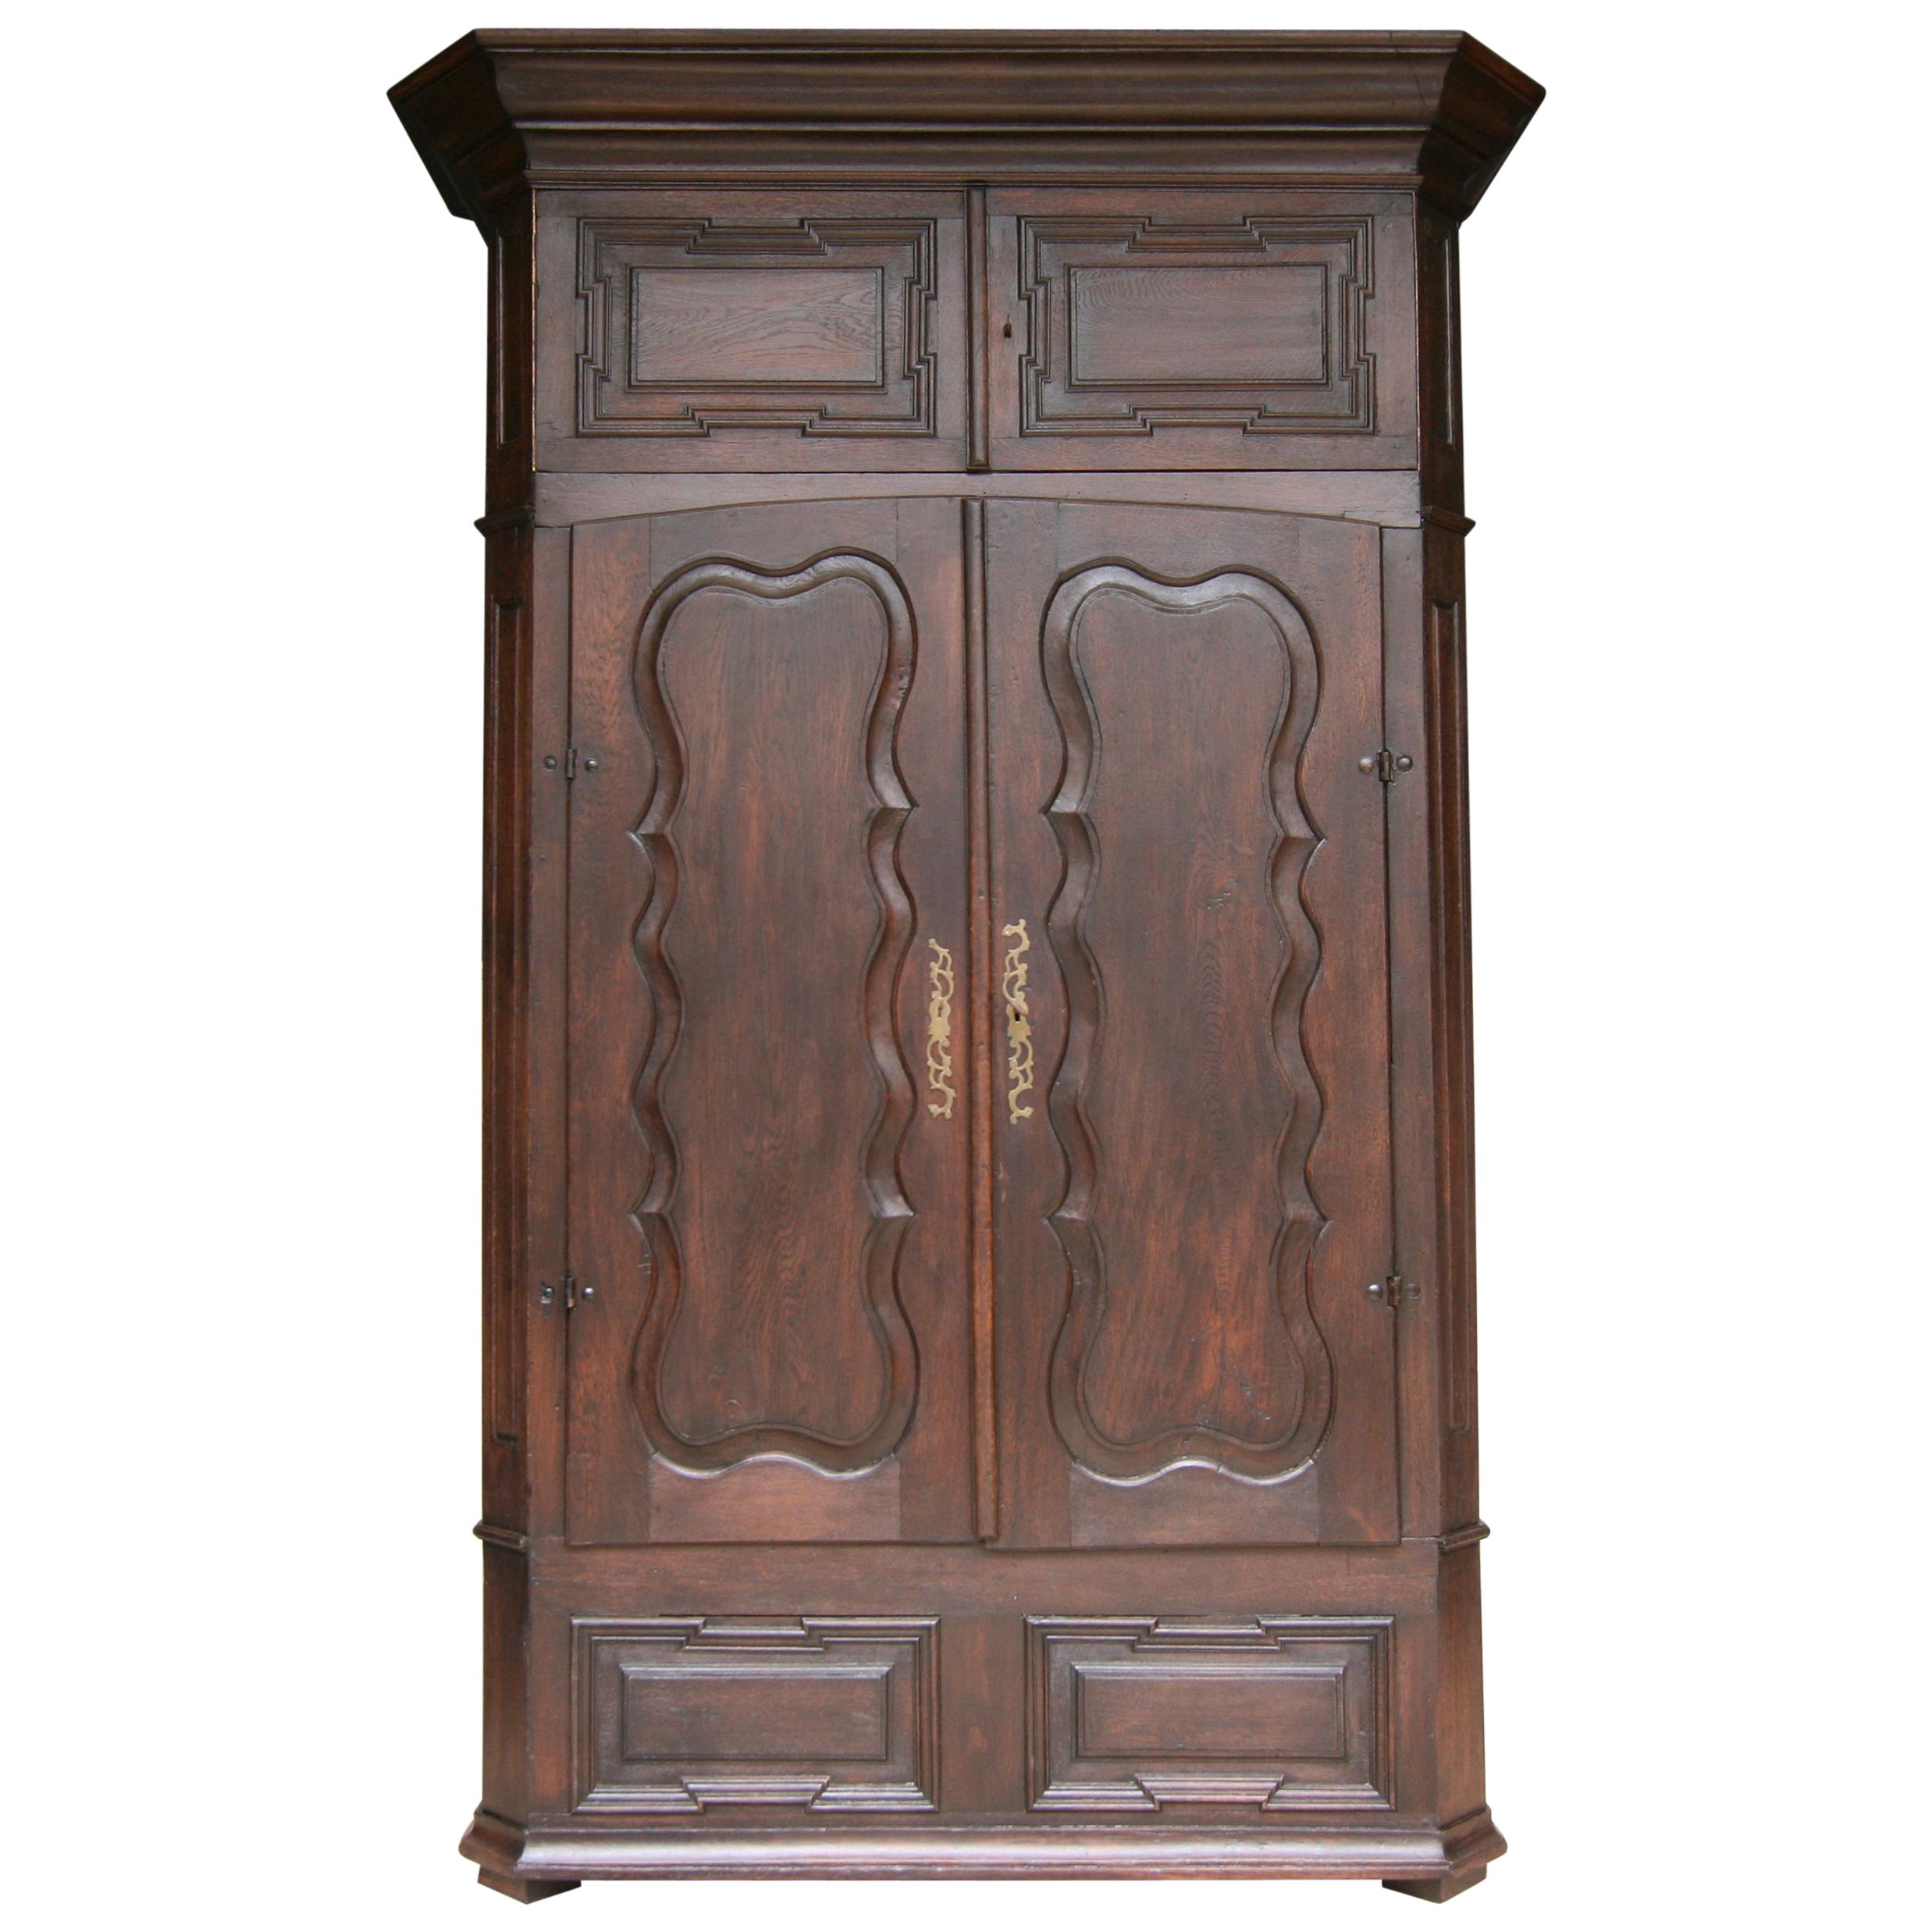 Late 18th Century German Monastery Cabinet Made of Oak